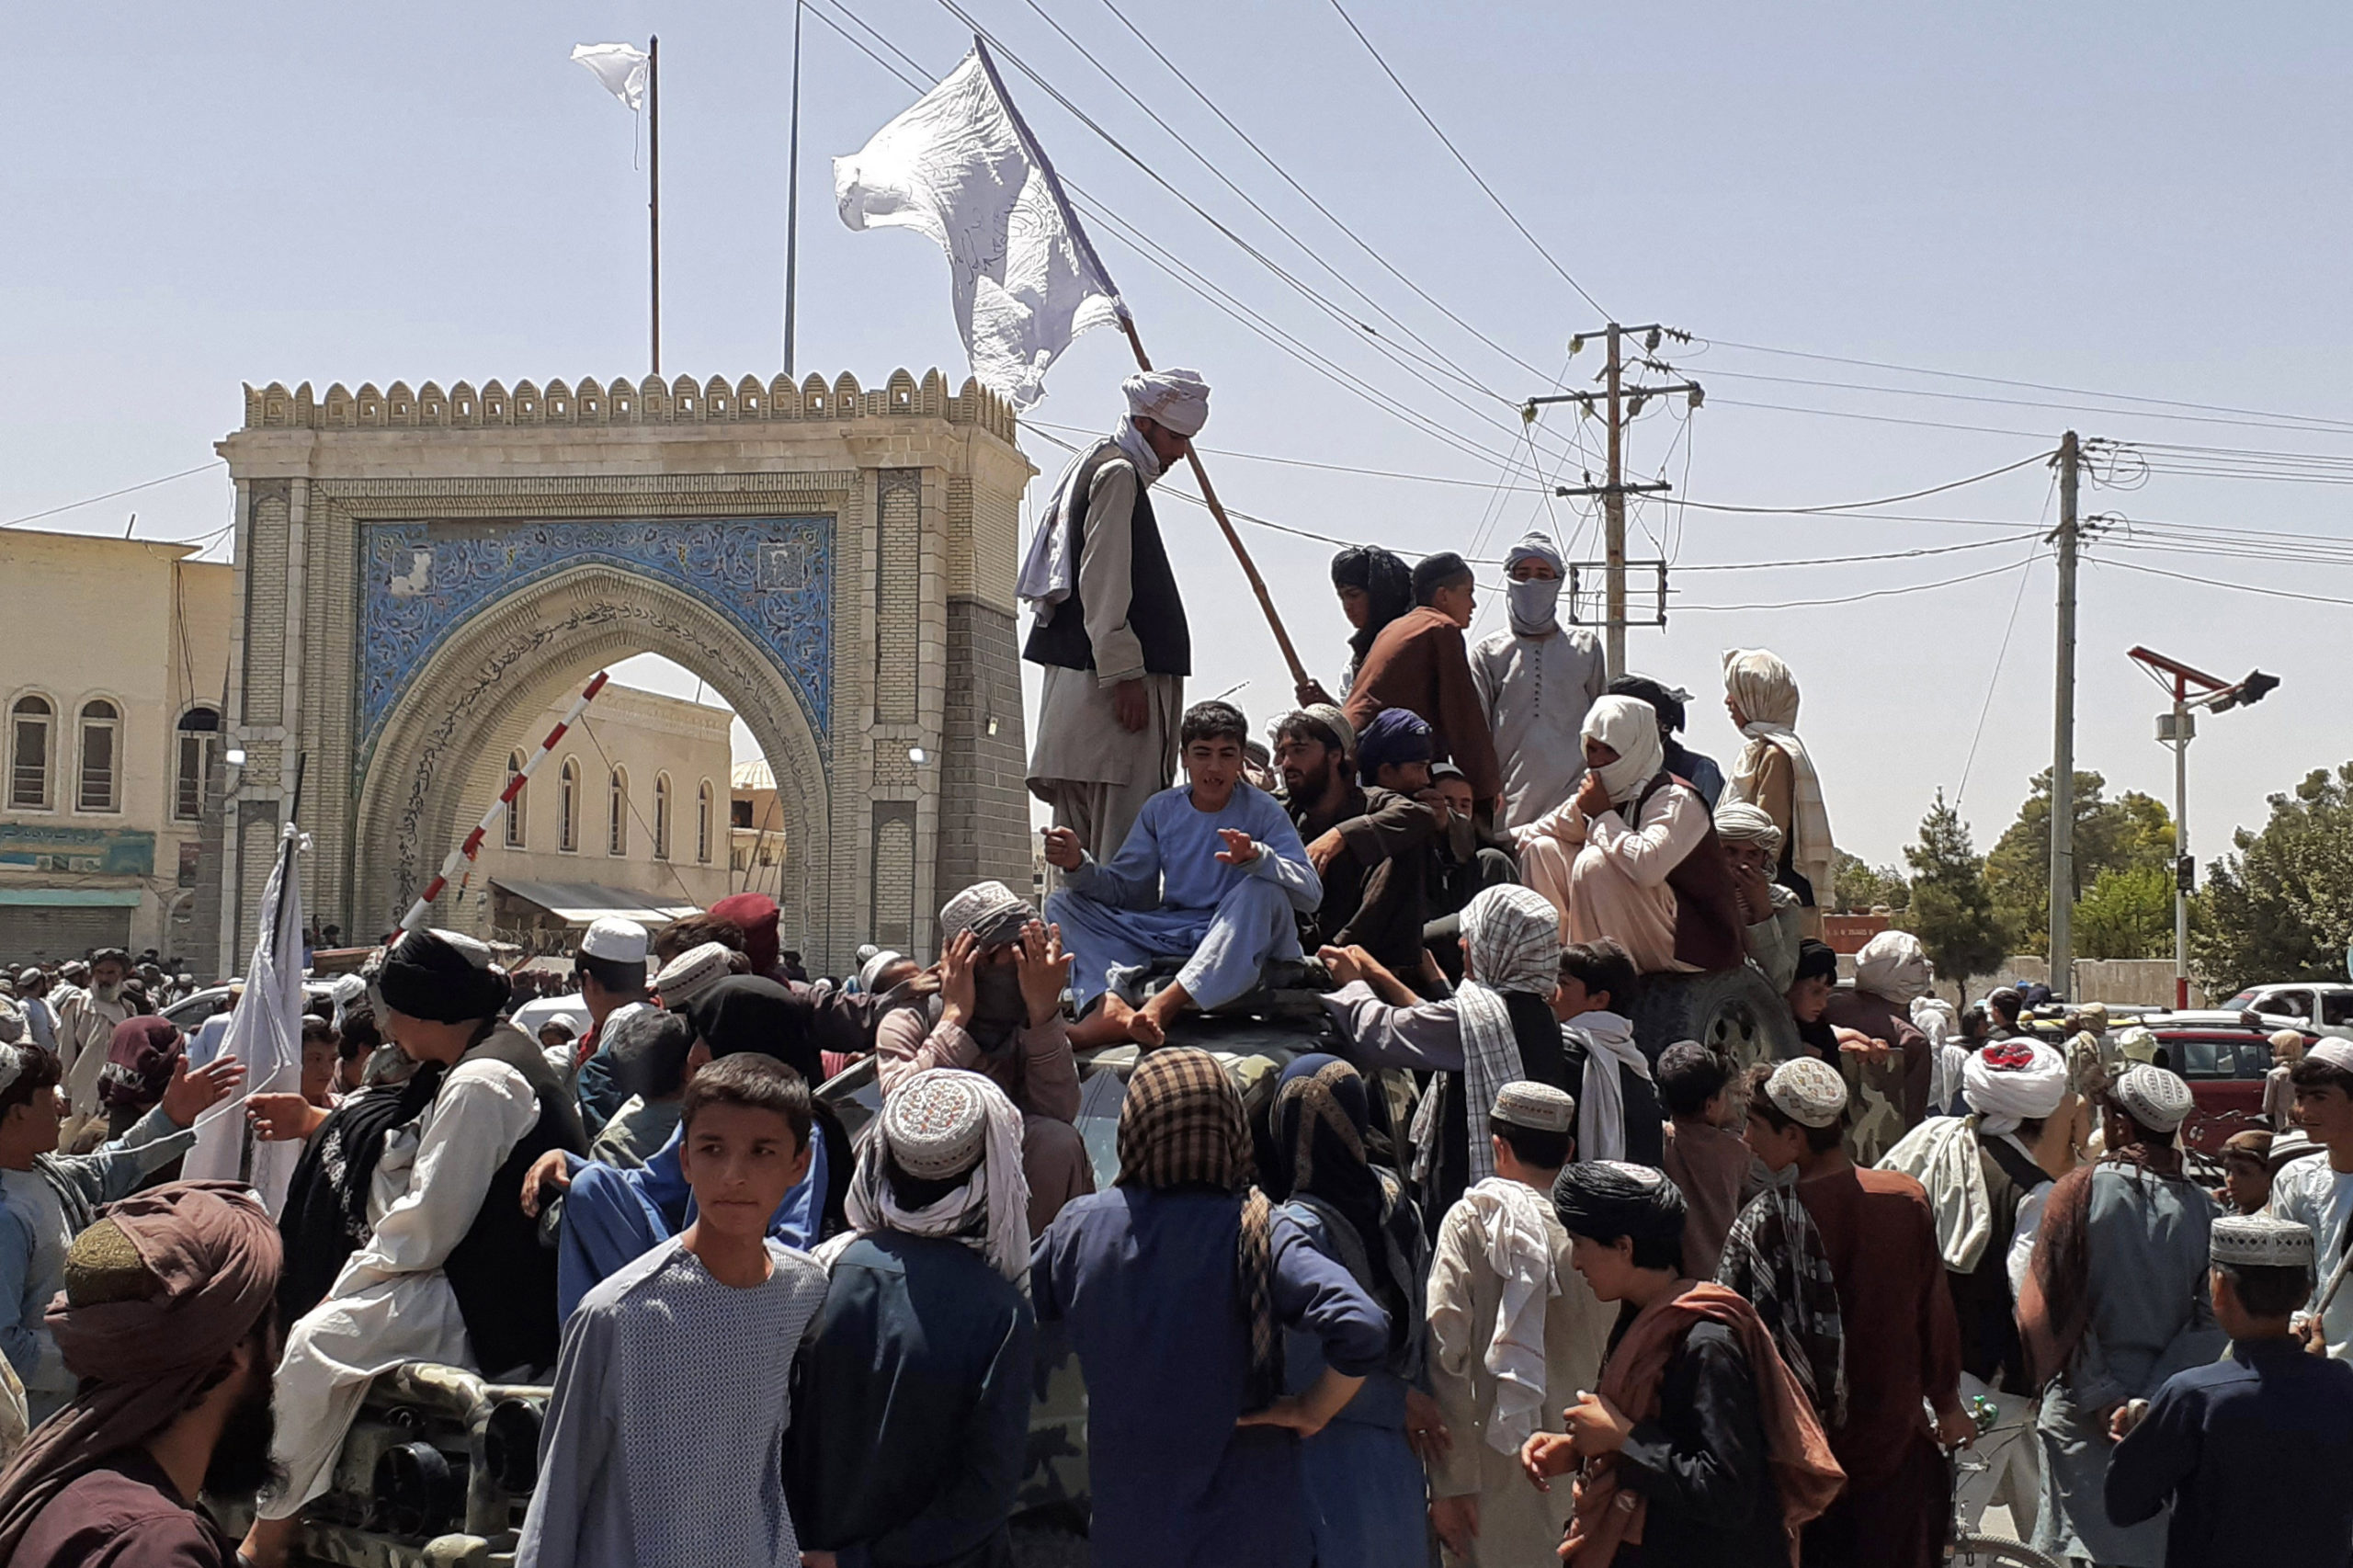 Taliban fighters stand on a vehicle along the roadside in Kandahar on Friday. (AFP via Getty Images)